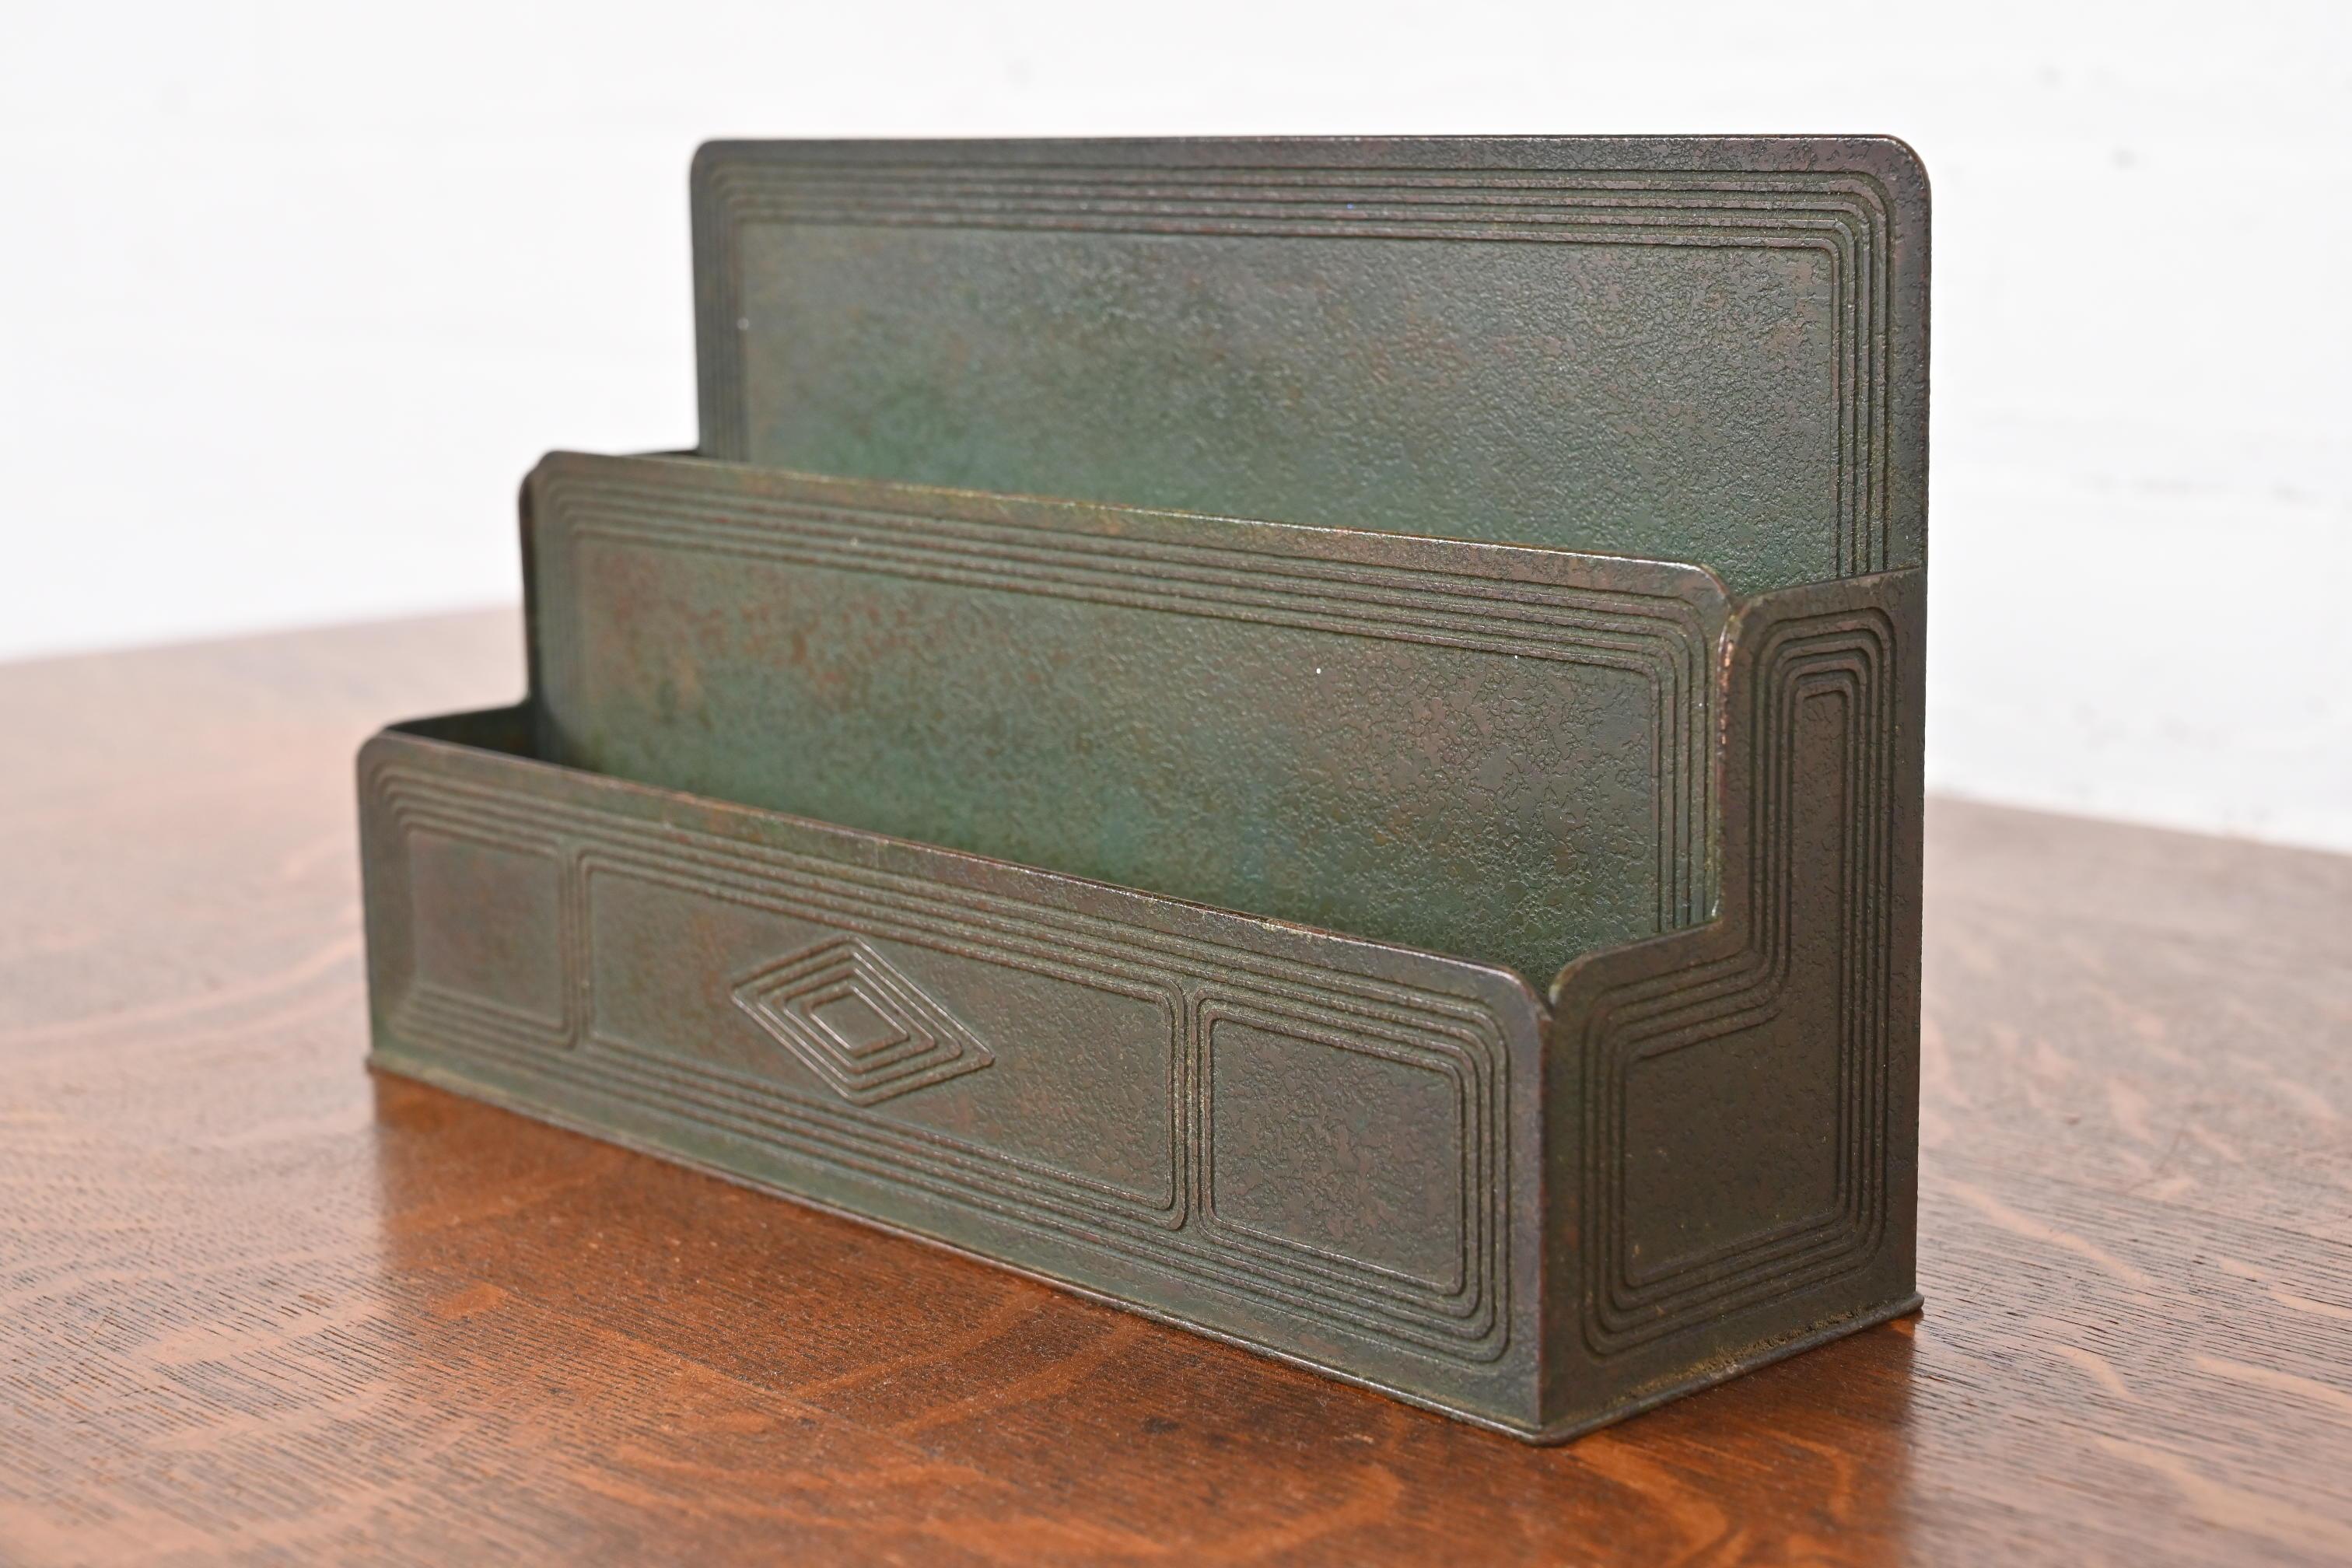 A gorgeous antique bronze Graduate pattern desk letter rack or letter sorter with verdigris green patina

By Tiffany Studios (signed to the underside)

New York, USA, Early 20th Century

Measures: 9.38